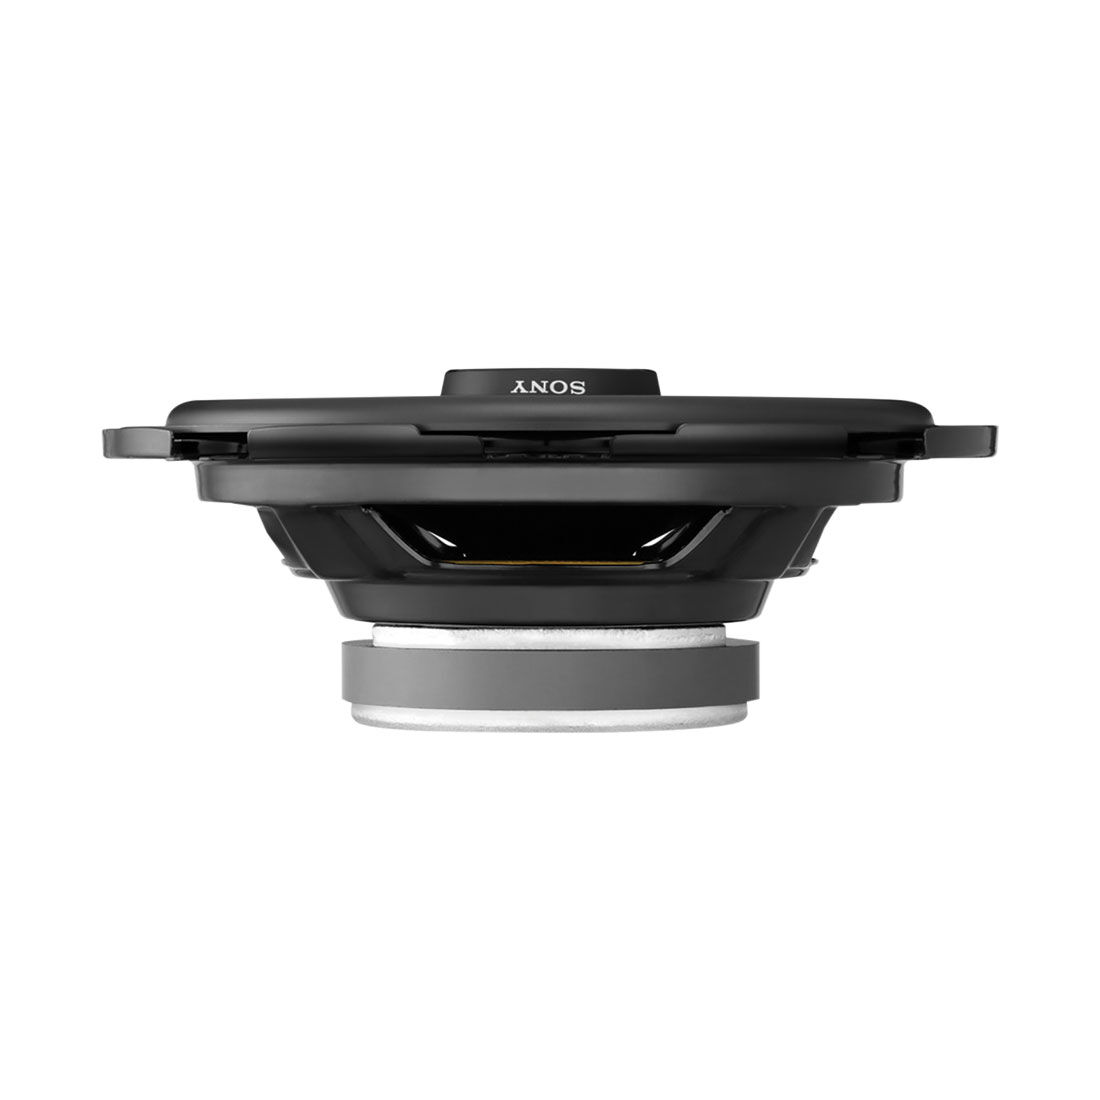 Sony Speakers 6.5" Coaxial 250W XS160GS, , scaau_hi-res